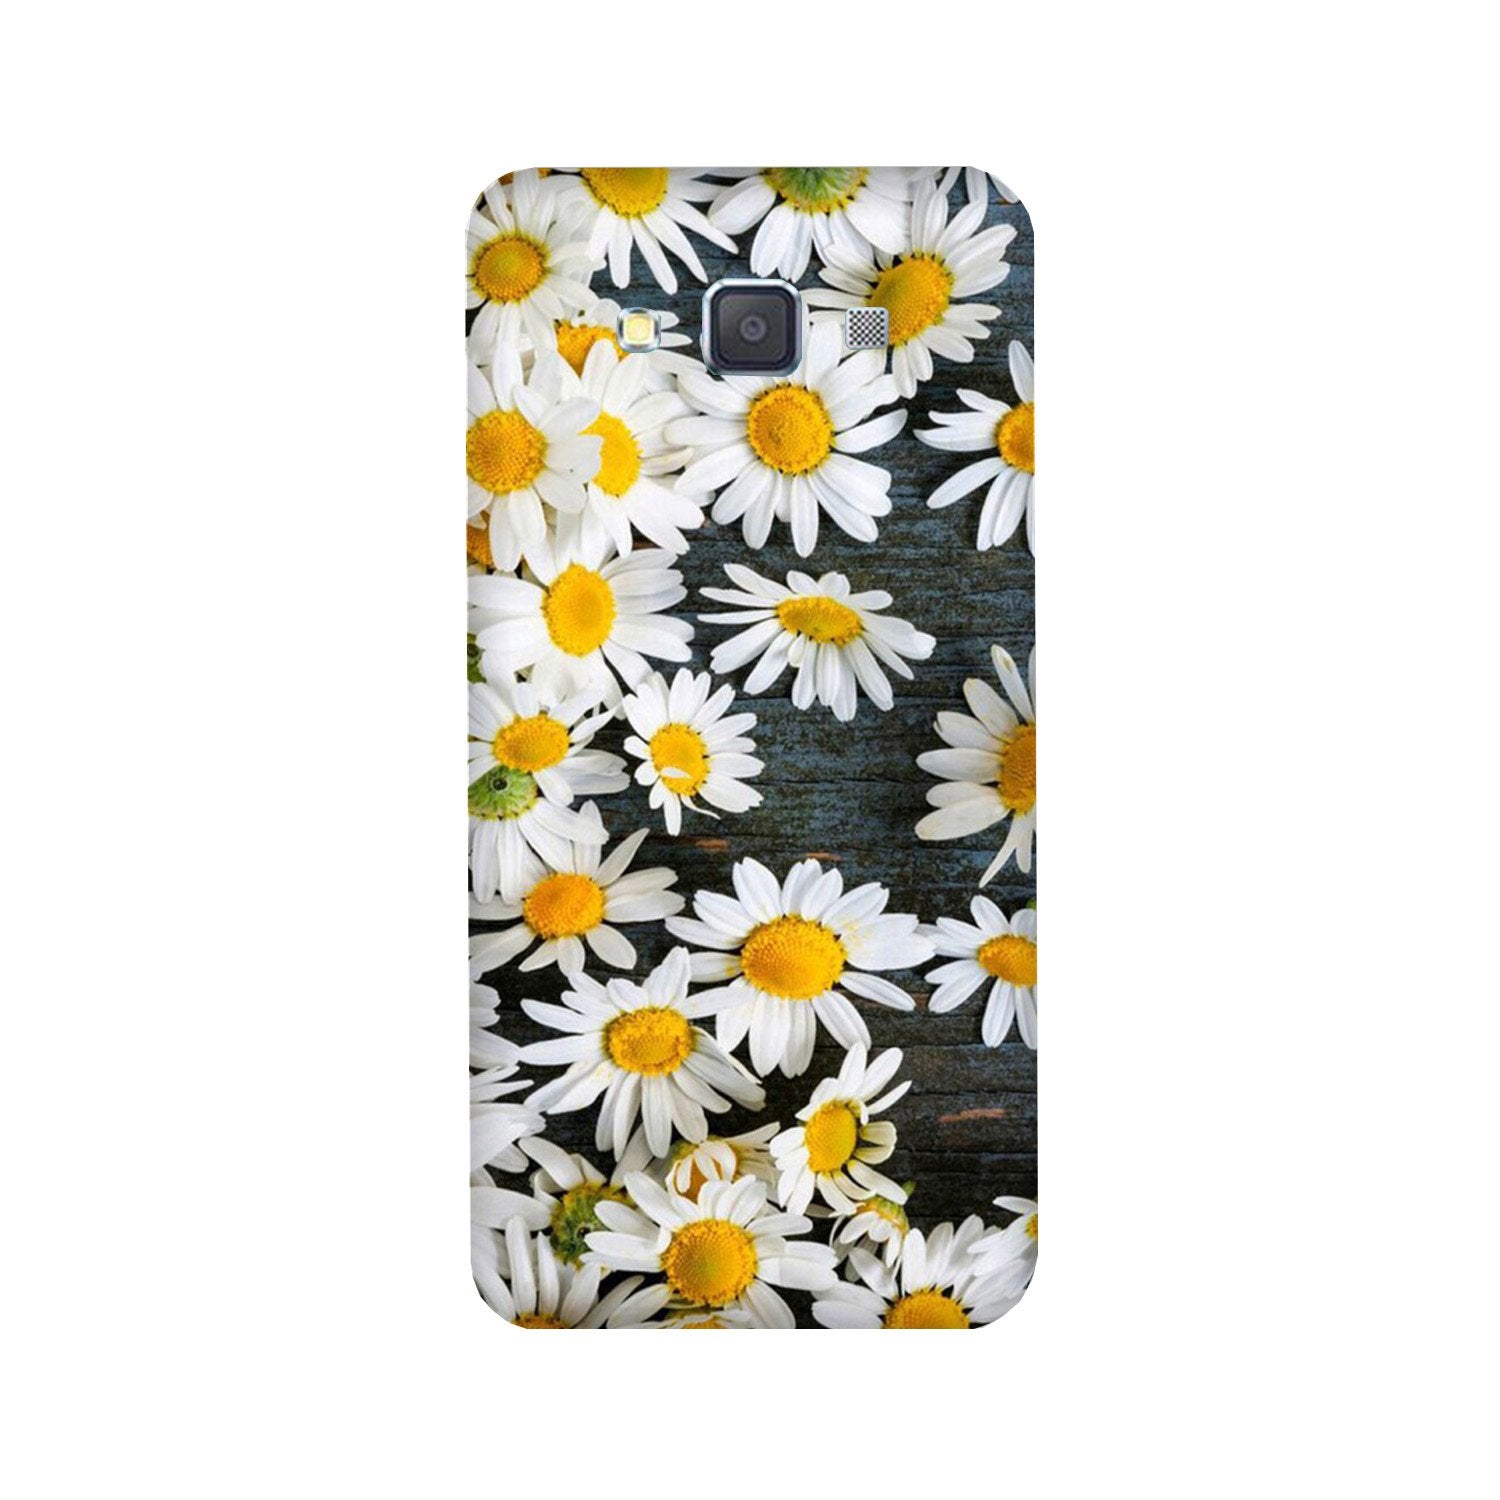 White flowers2 Case for Galaxy J5 (2016)